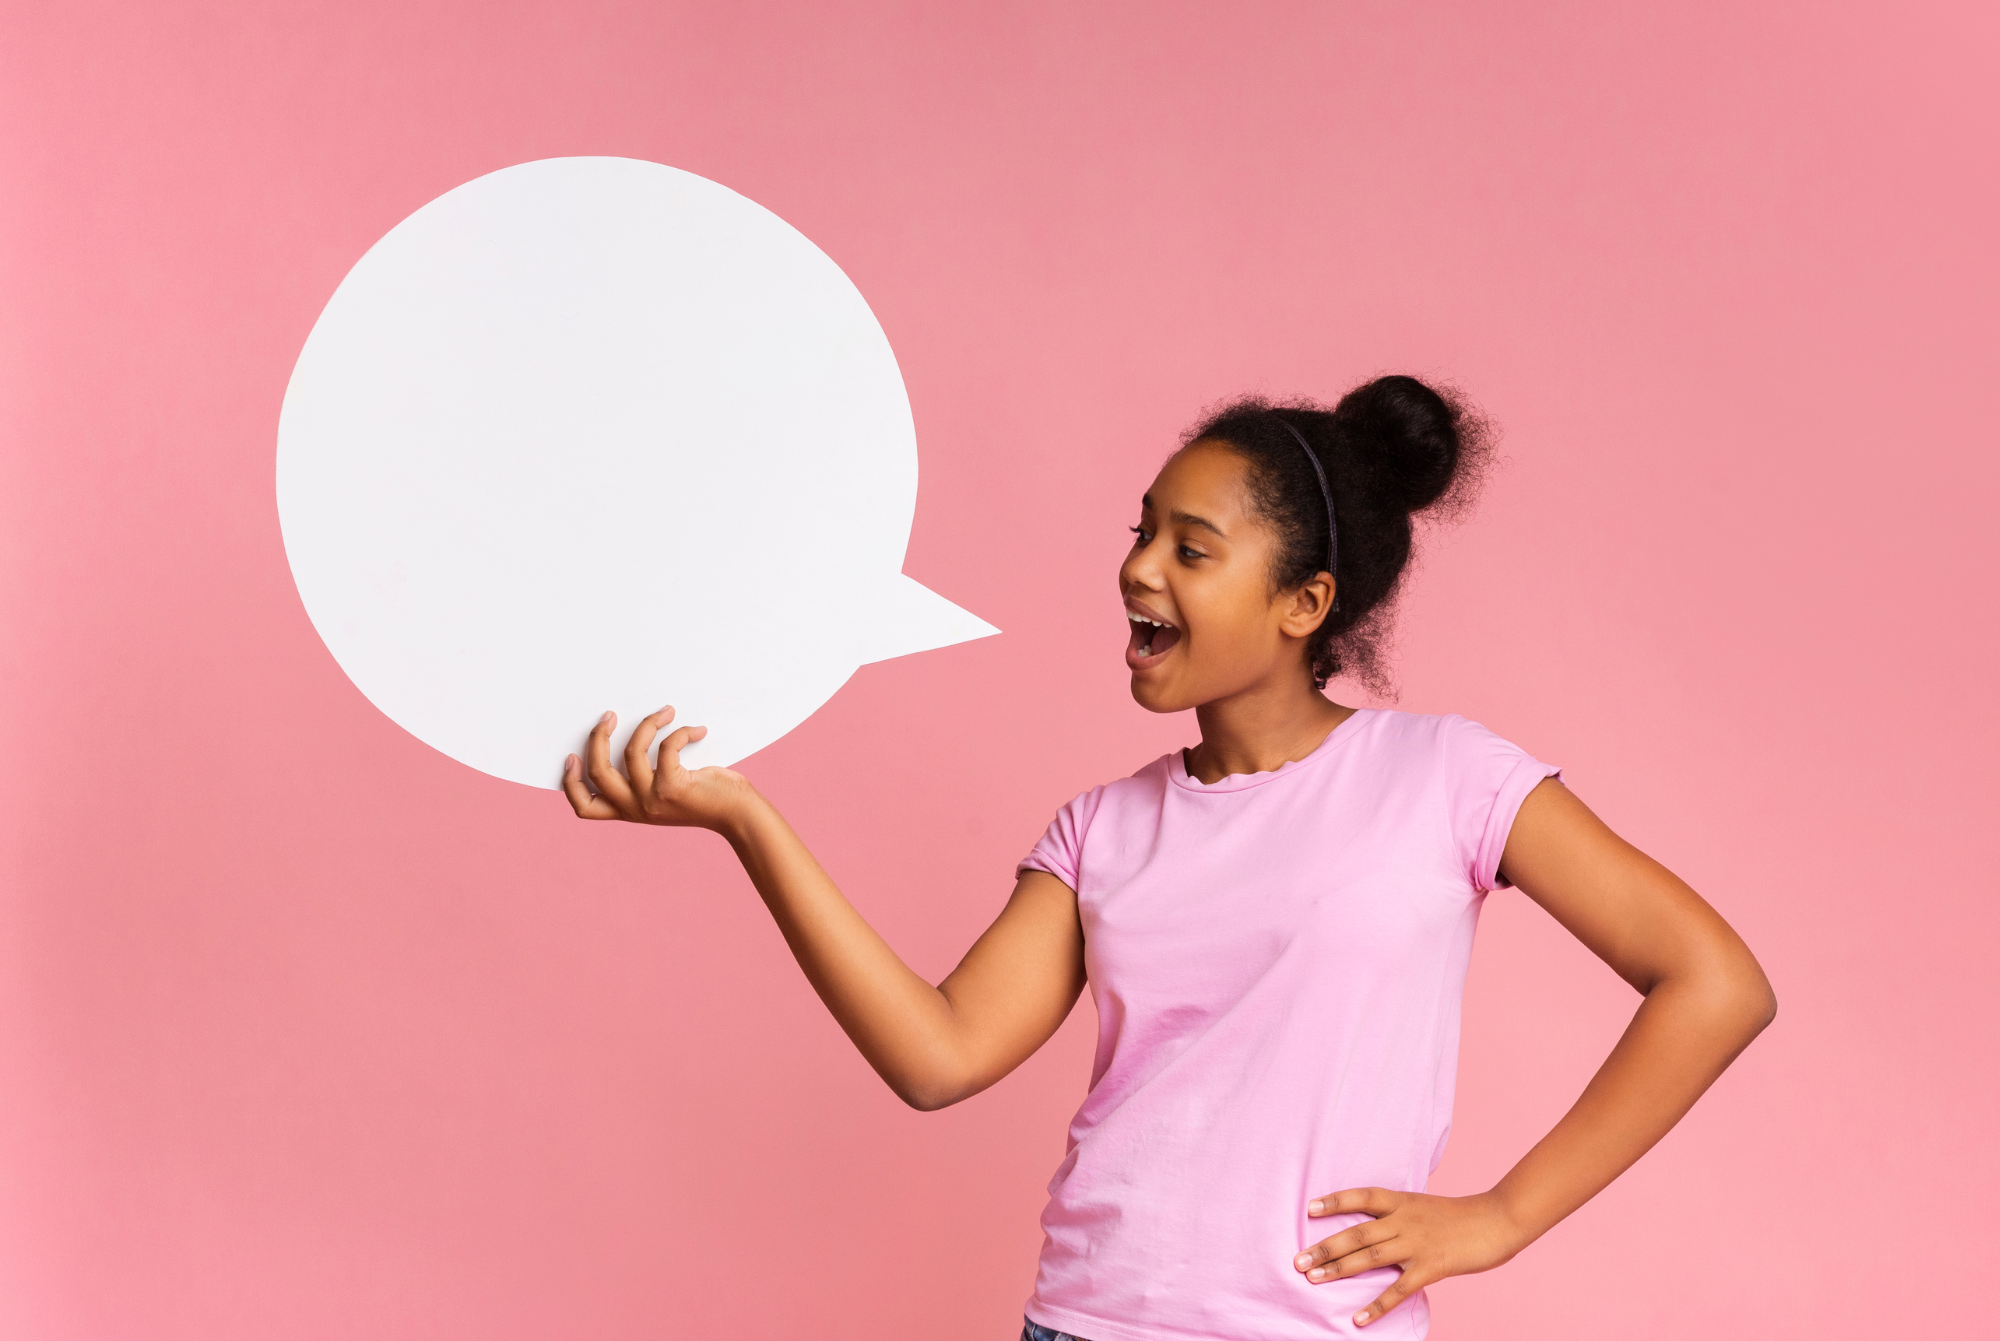 A tween or teen girl with brown skin and black hair wearing a light pink shirt holds a speech bubble as if she is about to say something.